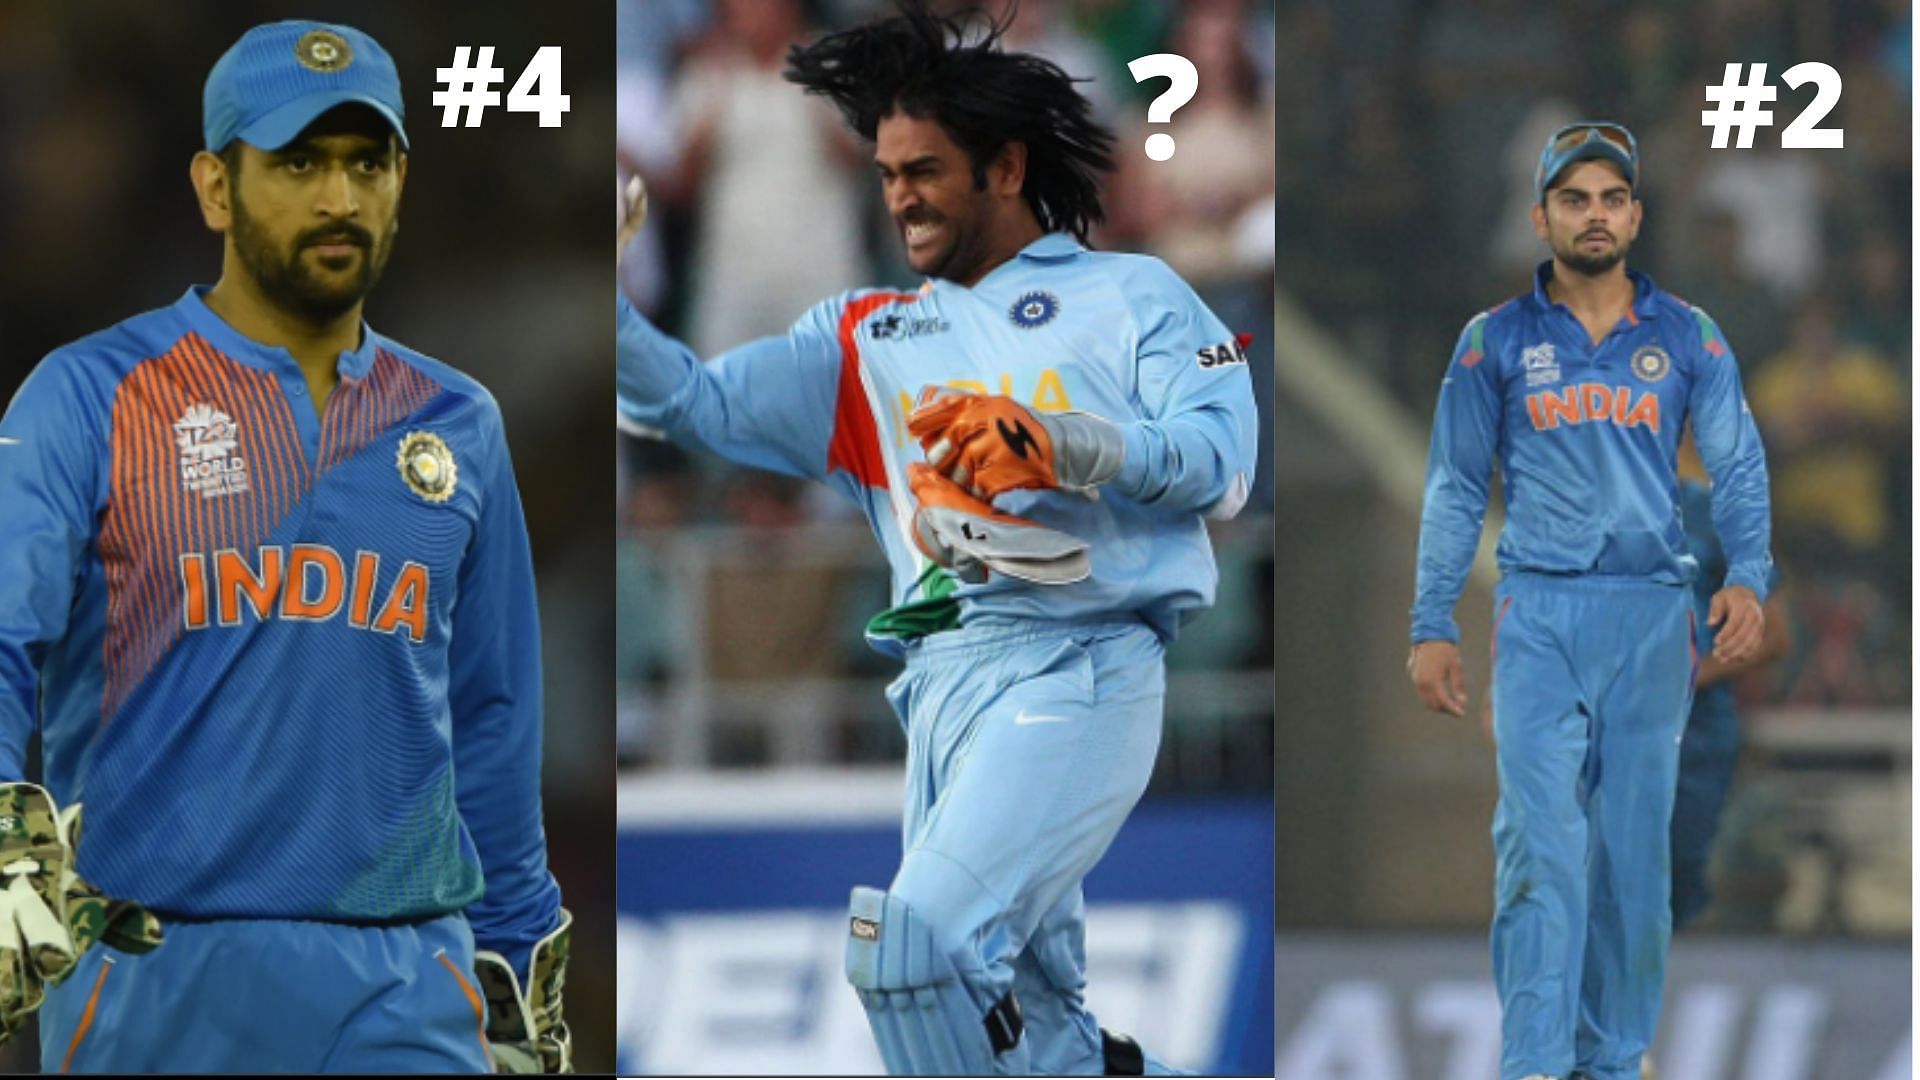 India have used different designs in the different T20 World Cups.